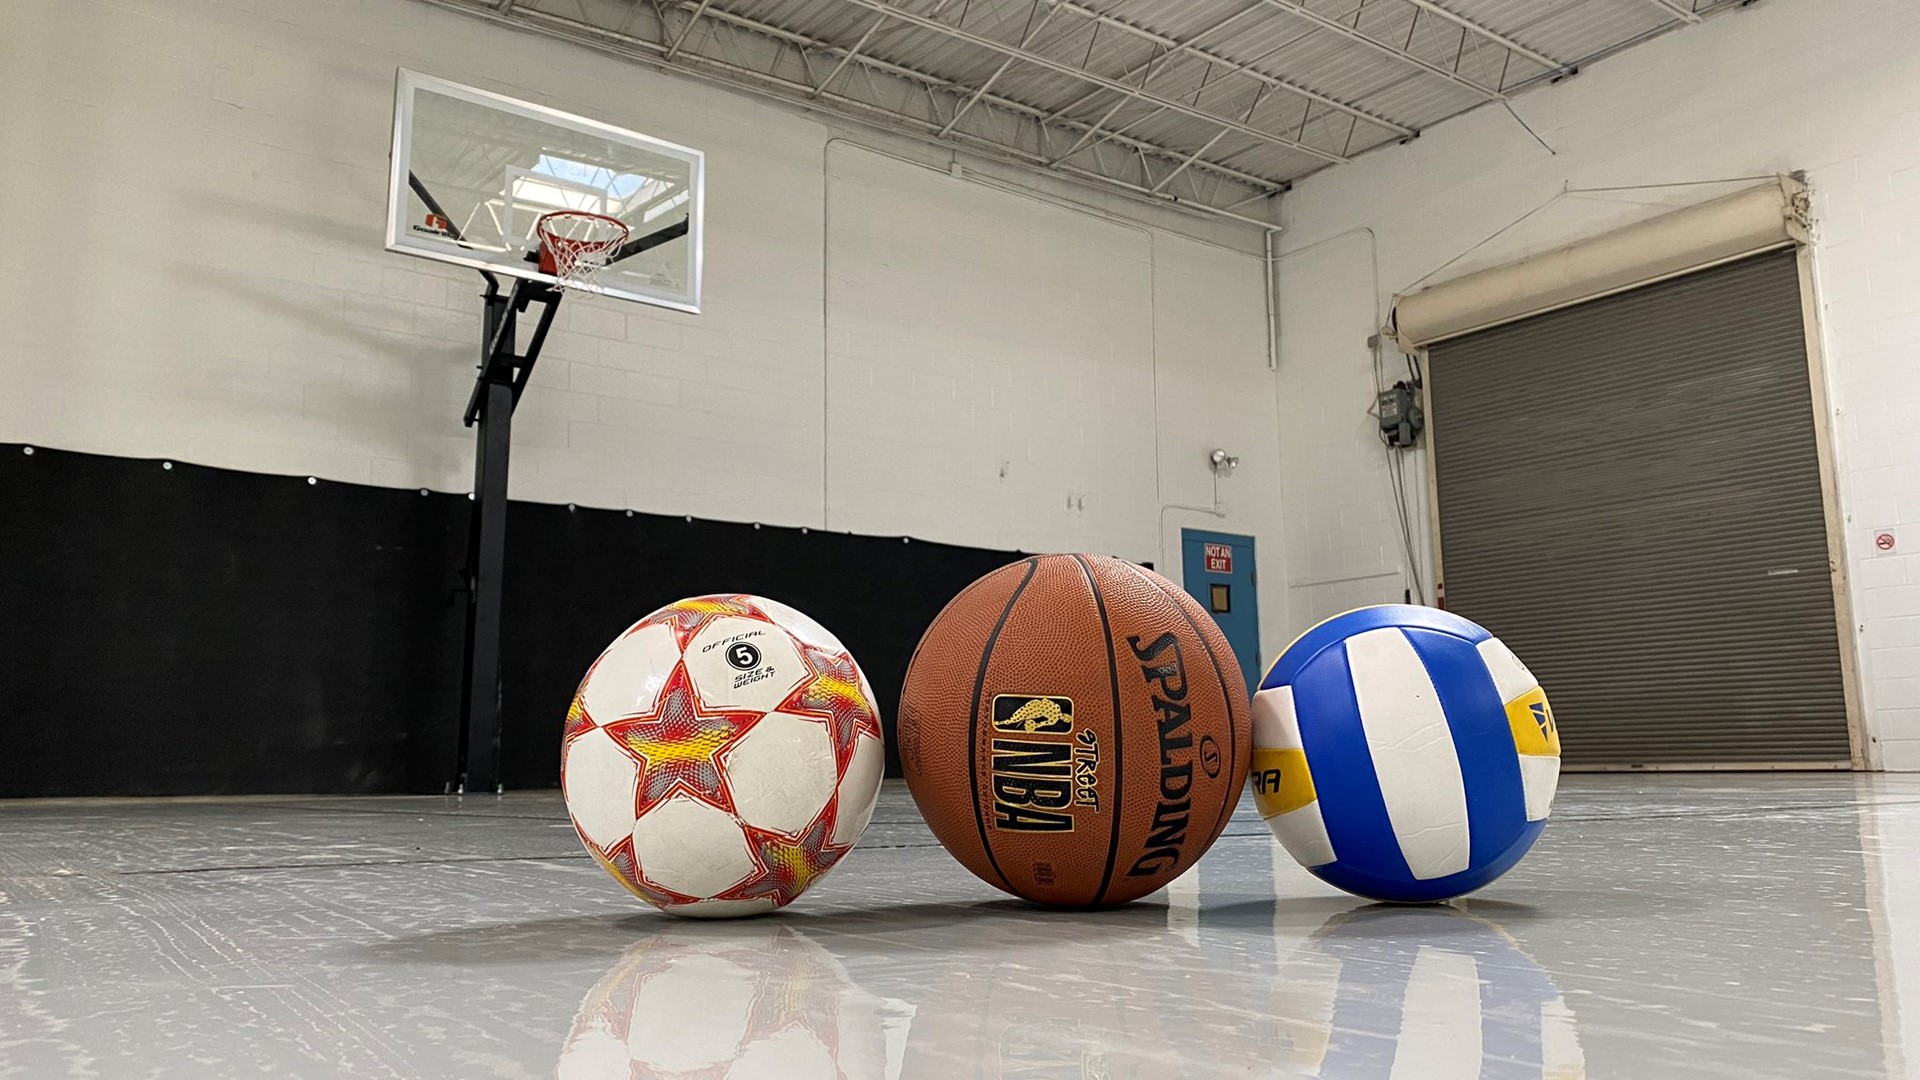 A35 Sport and Social Club will initially offer basketball, volleyball and soccer for leagues and walk-in open gyms.